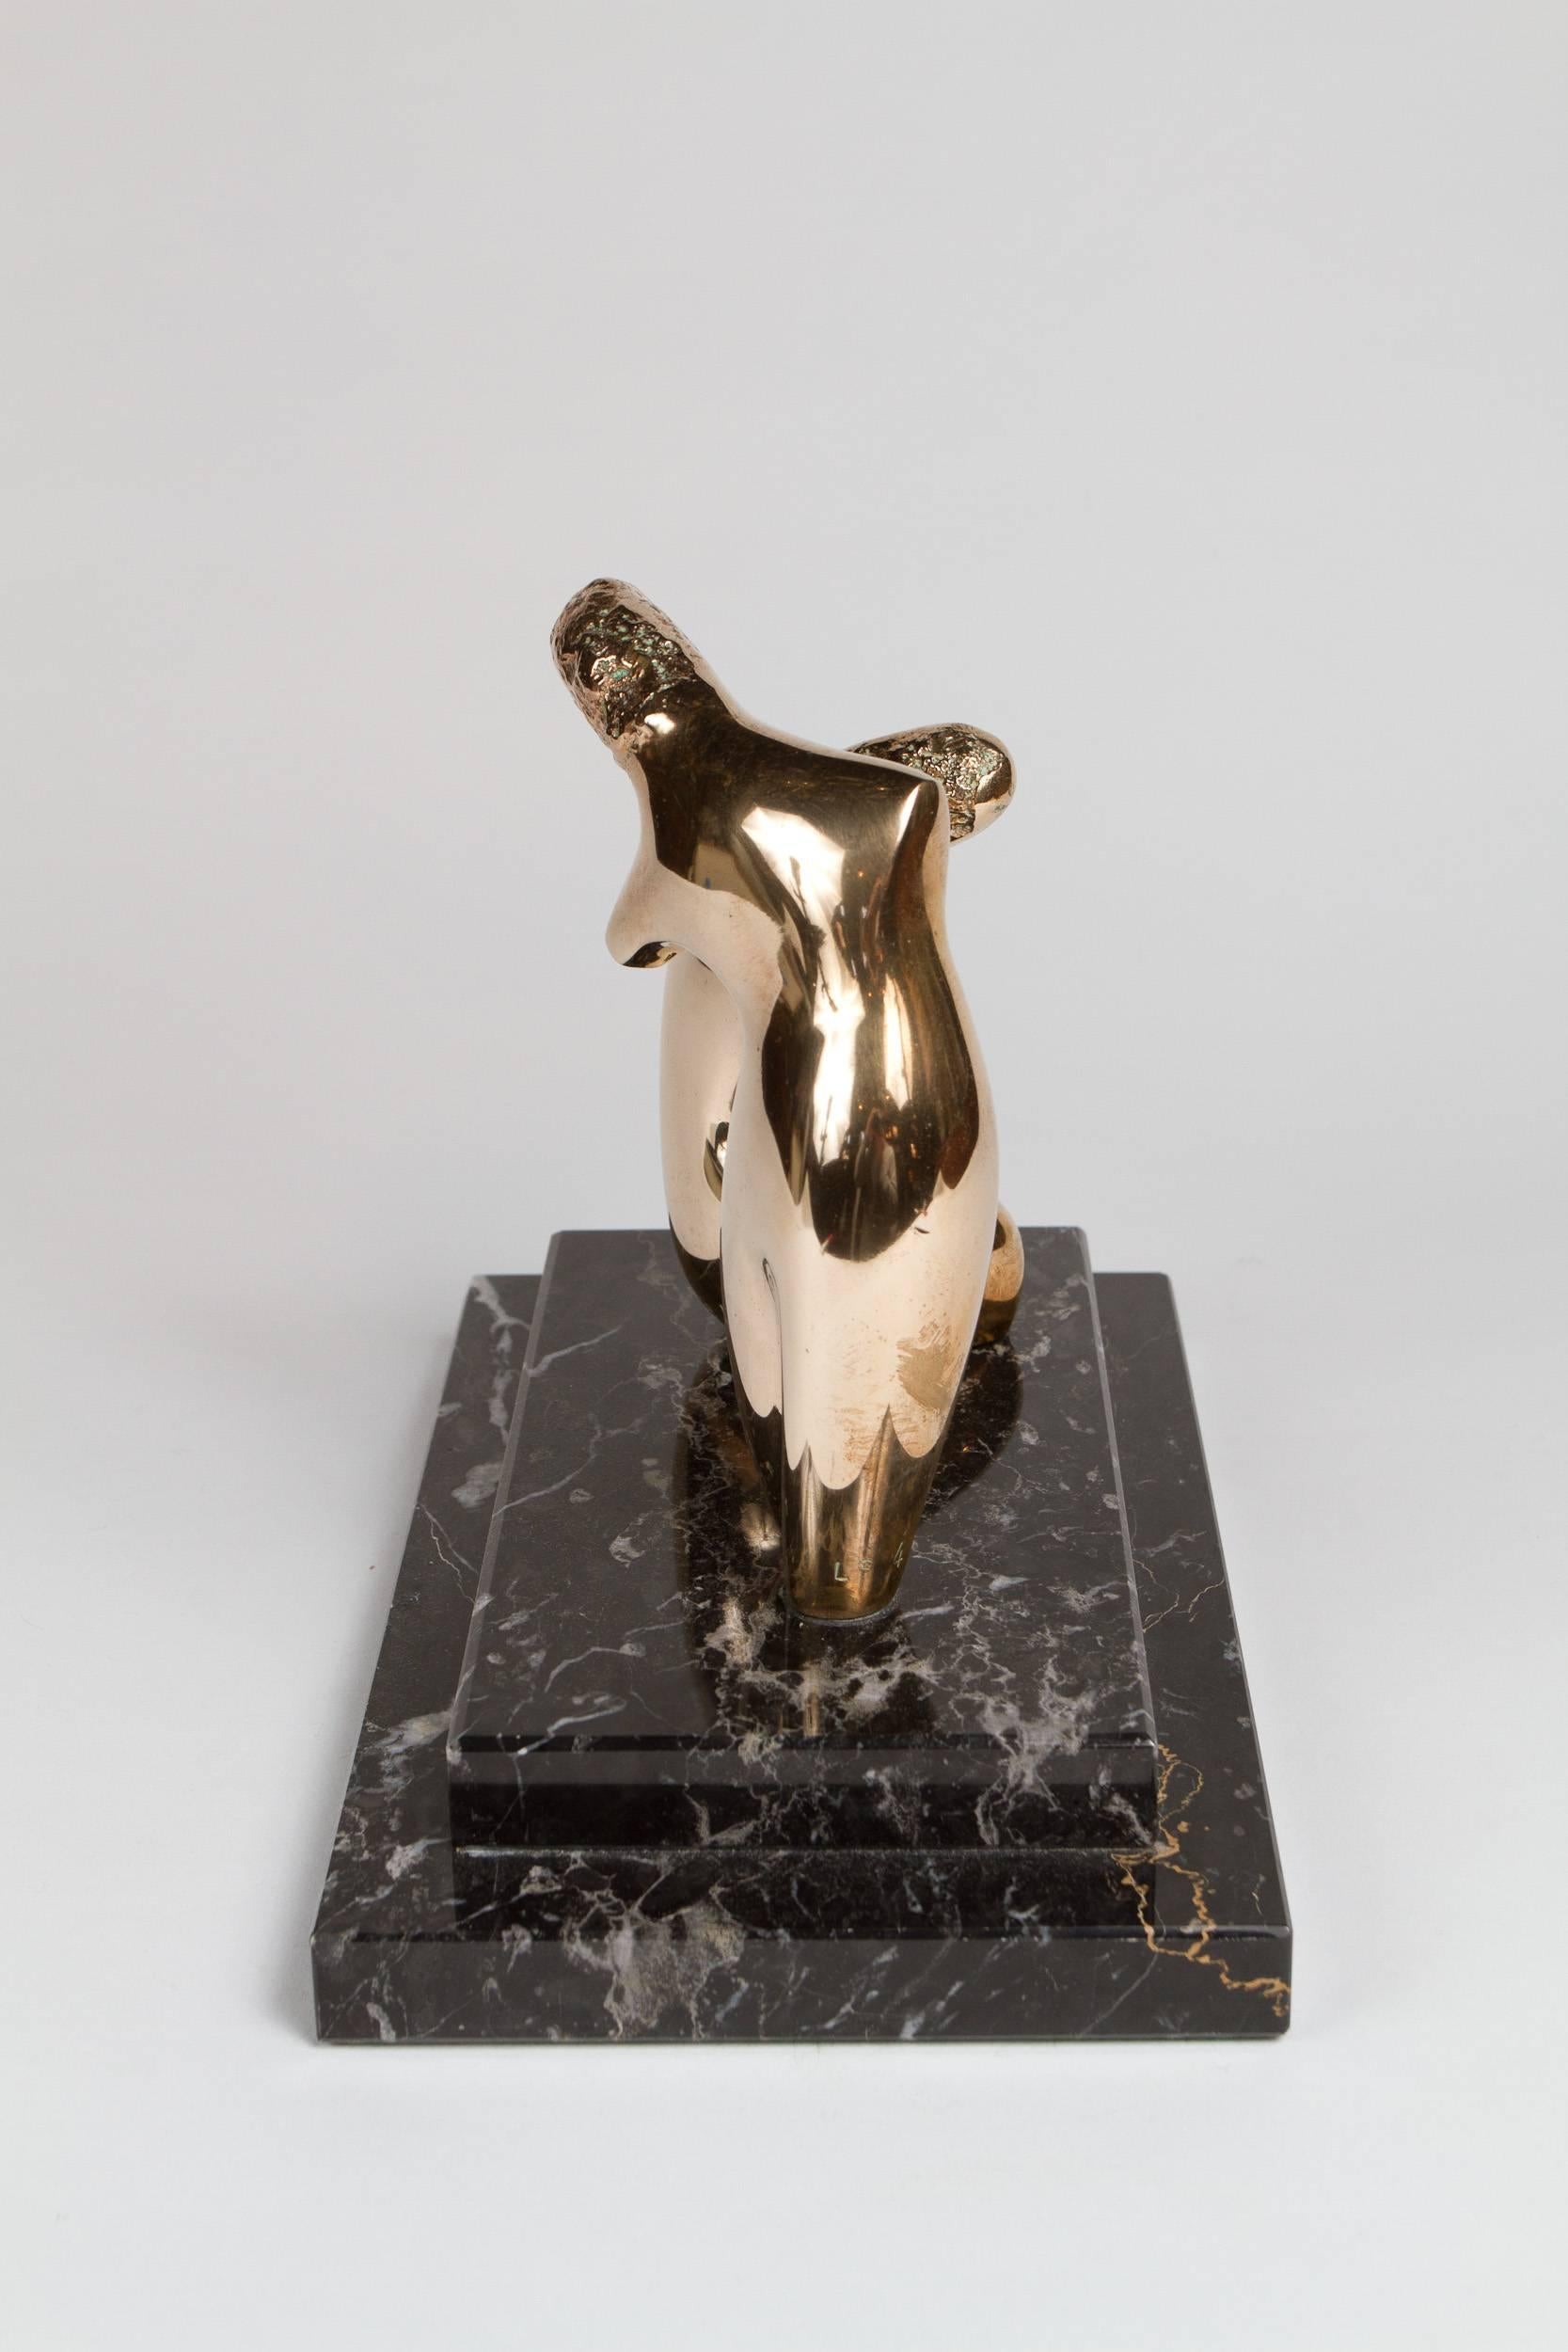 Canadian Polished Bronze Abstract Sculpture of Two Woman